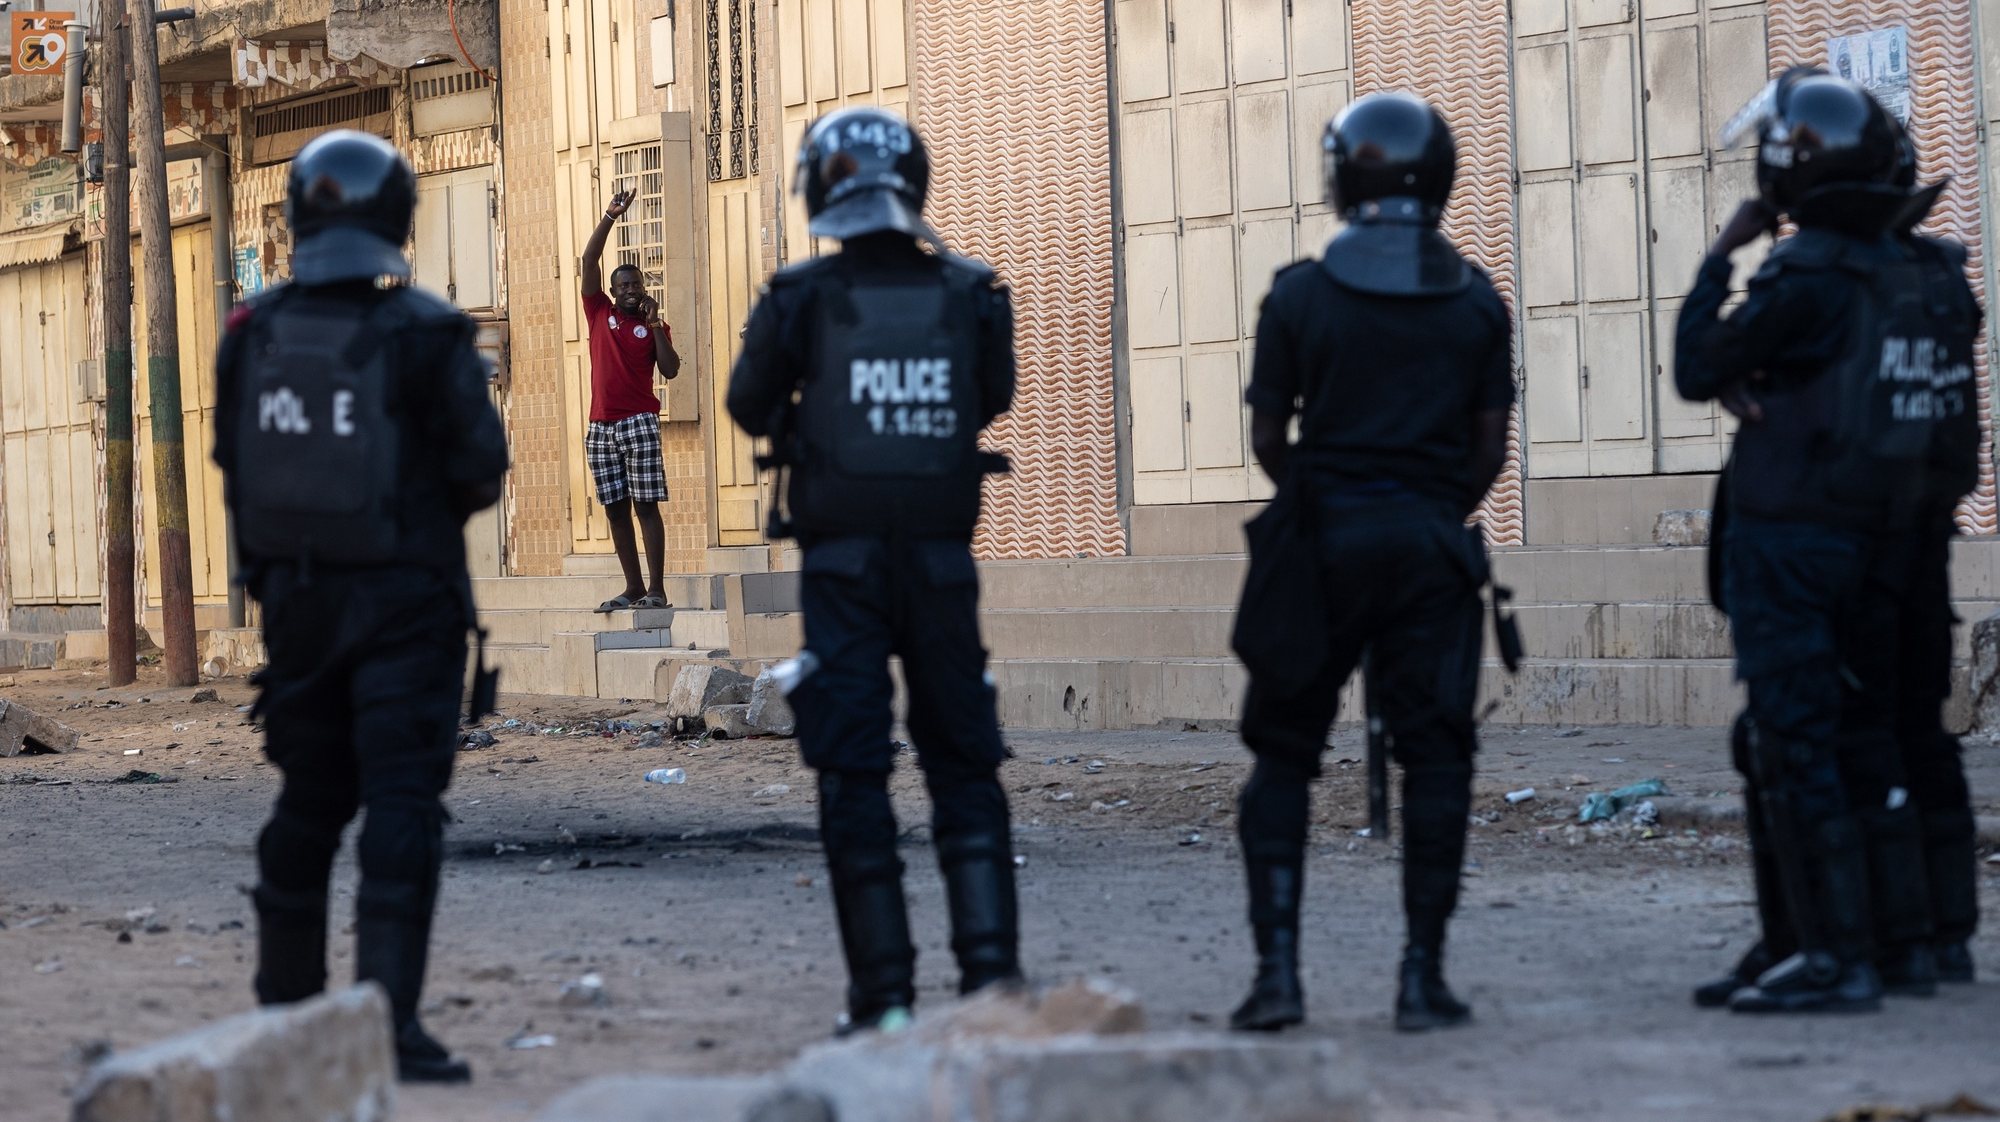 epa10671655 A local resident waves from a doorstep as police conduct an operation during a riot in Dakar, Senegal, 03 June 2023. Riots have taken place in Dakar and other cities in Senegal following the conviction on 01 June 2023 of opposition leader Ousmane Sonko on charges of corruption.  EPA/JEROME FAVRE